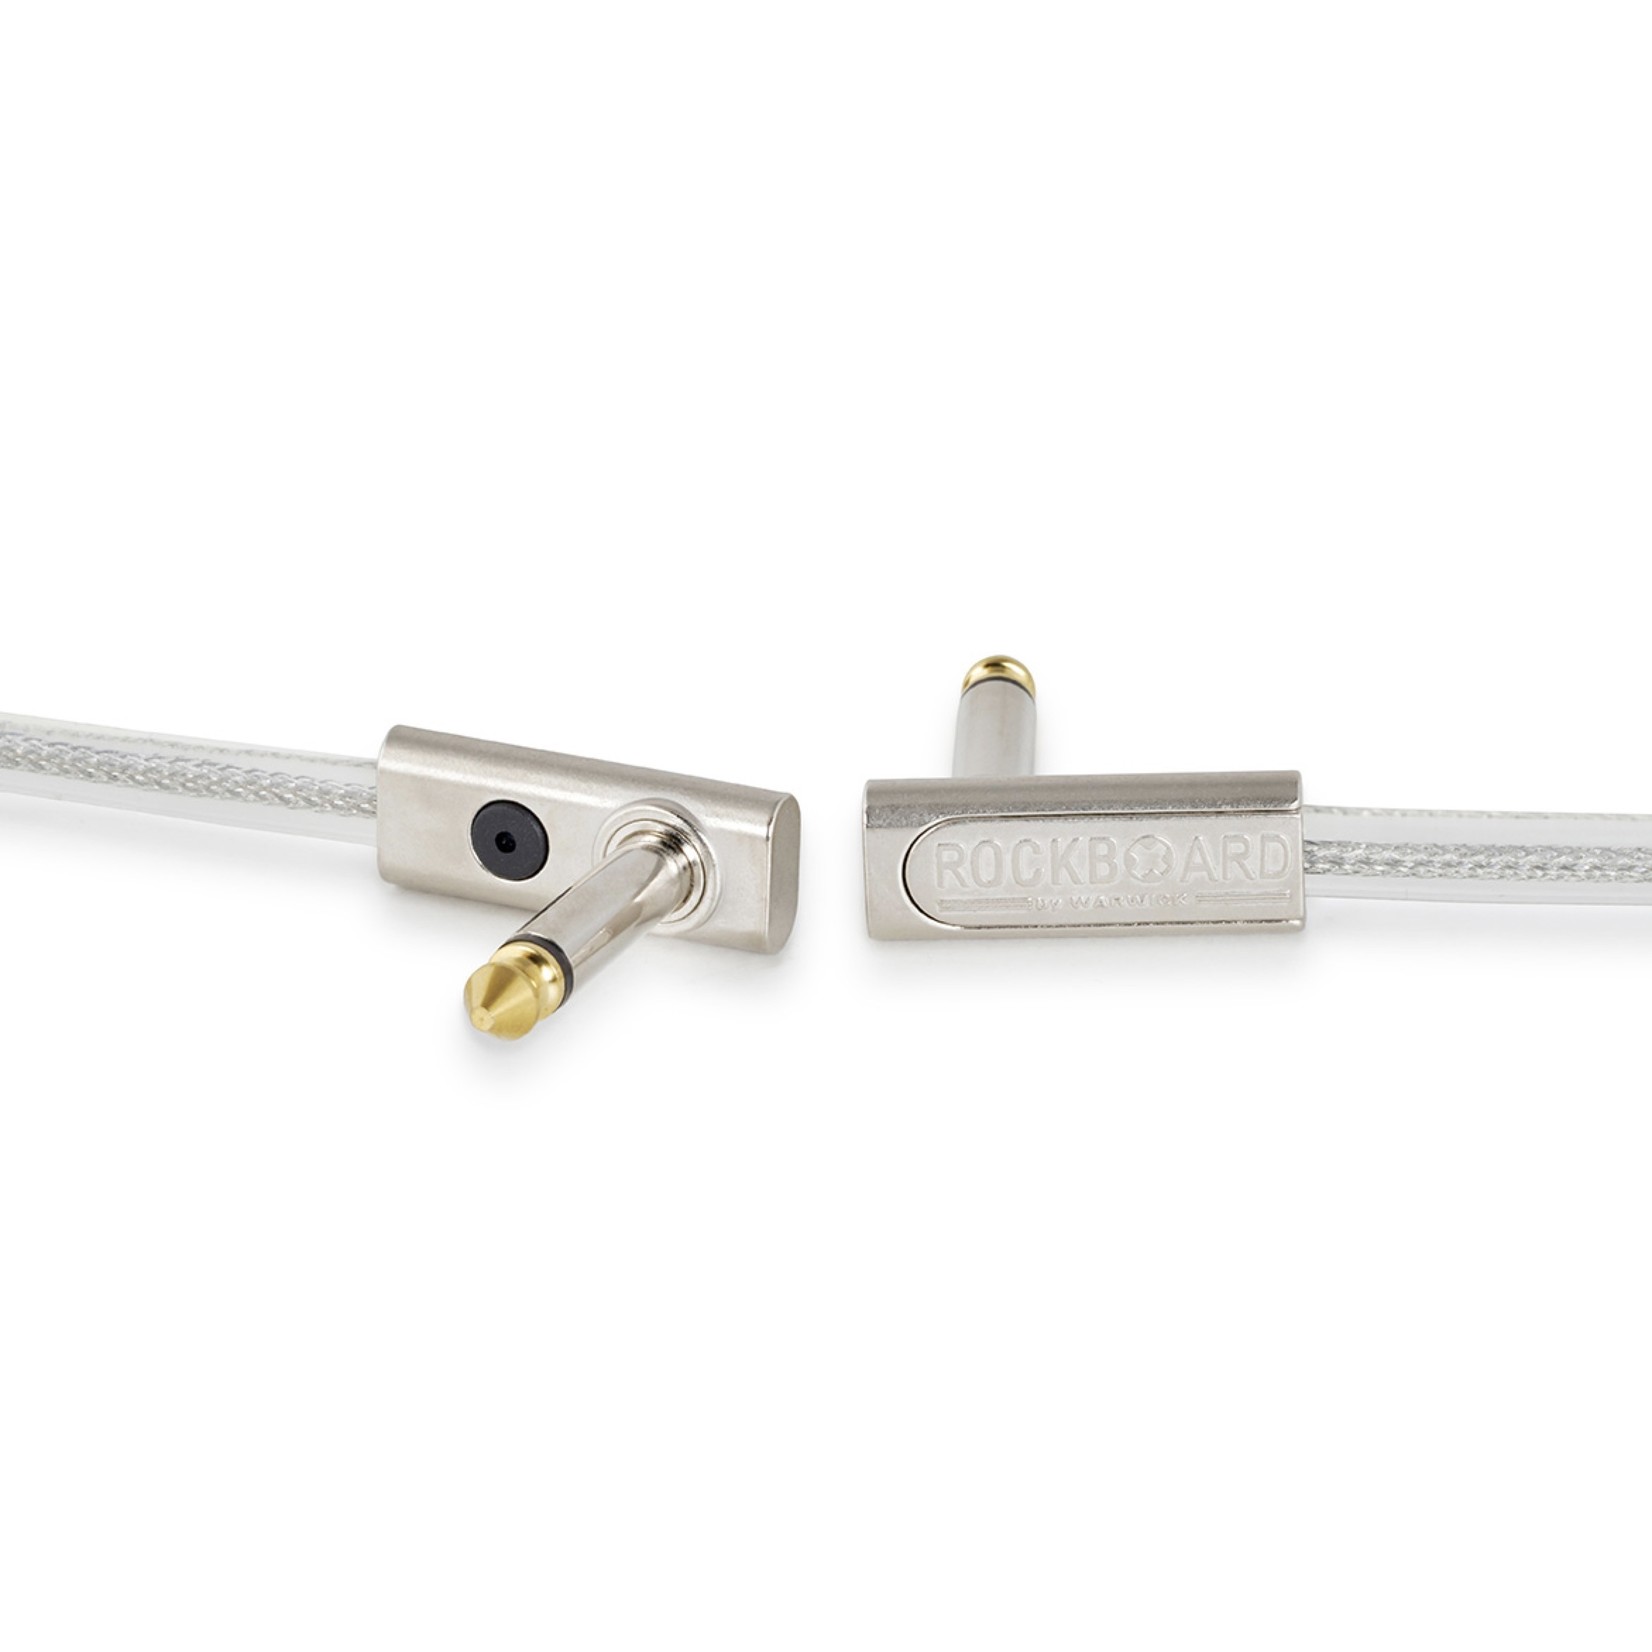 Rockboard RockBoard Flat Patch Cable - Sapphire Series 5 cm (1 15/16"), upgraded shielding, contacts